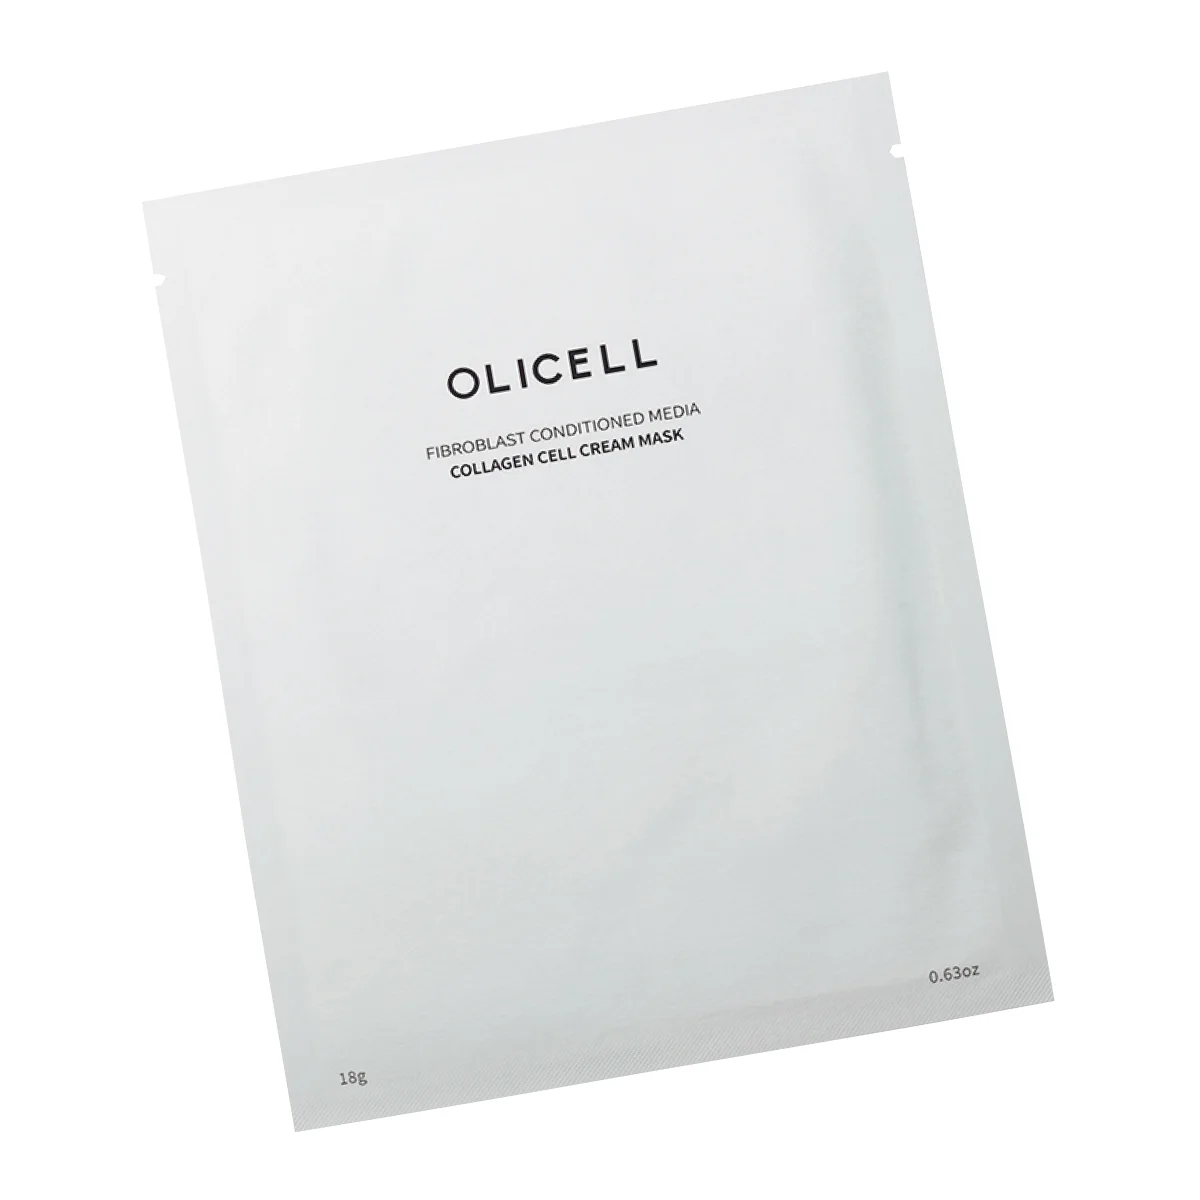 OLICELL COLLAGEN CELL CREAM MASK